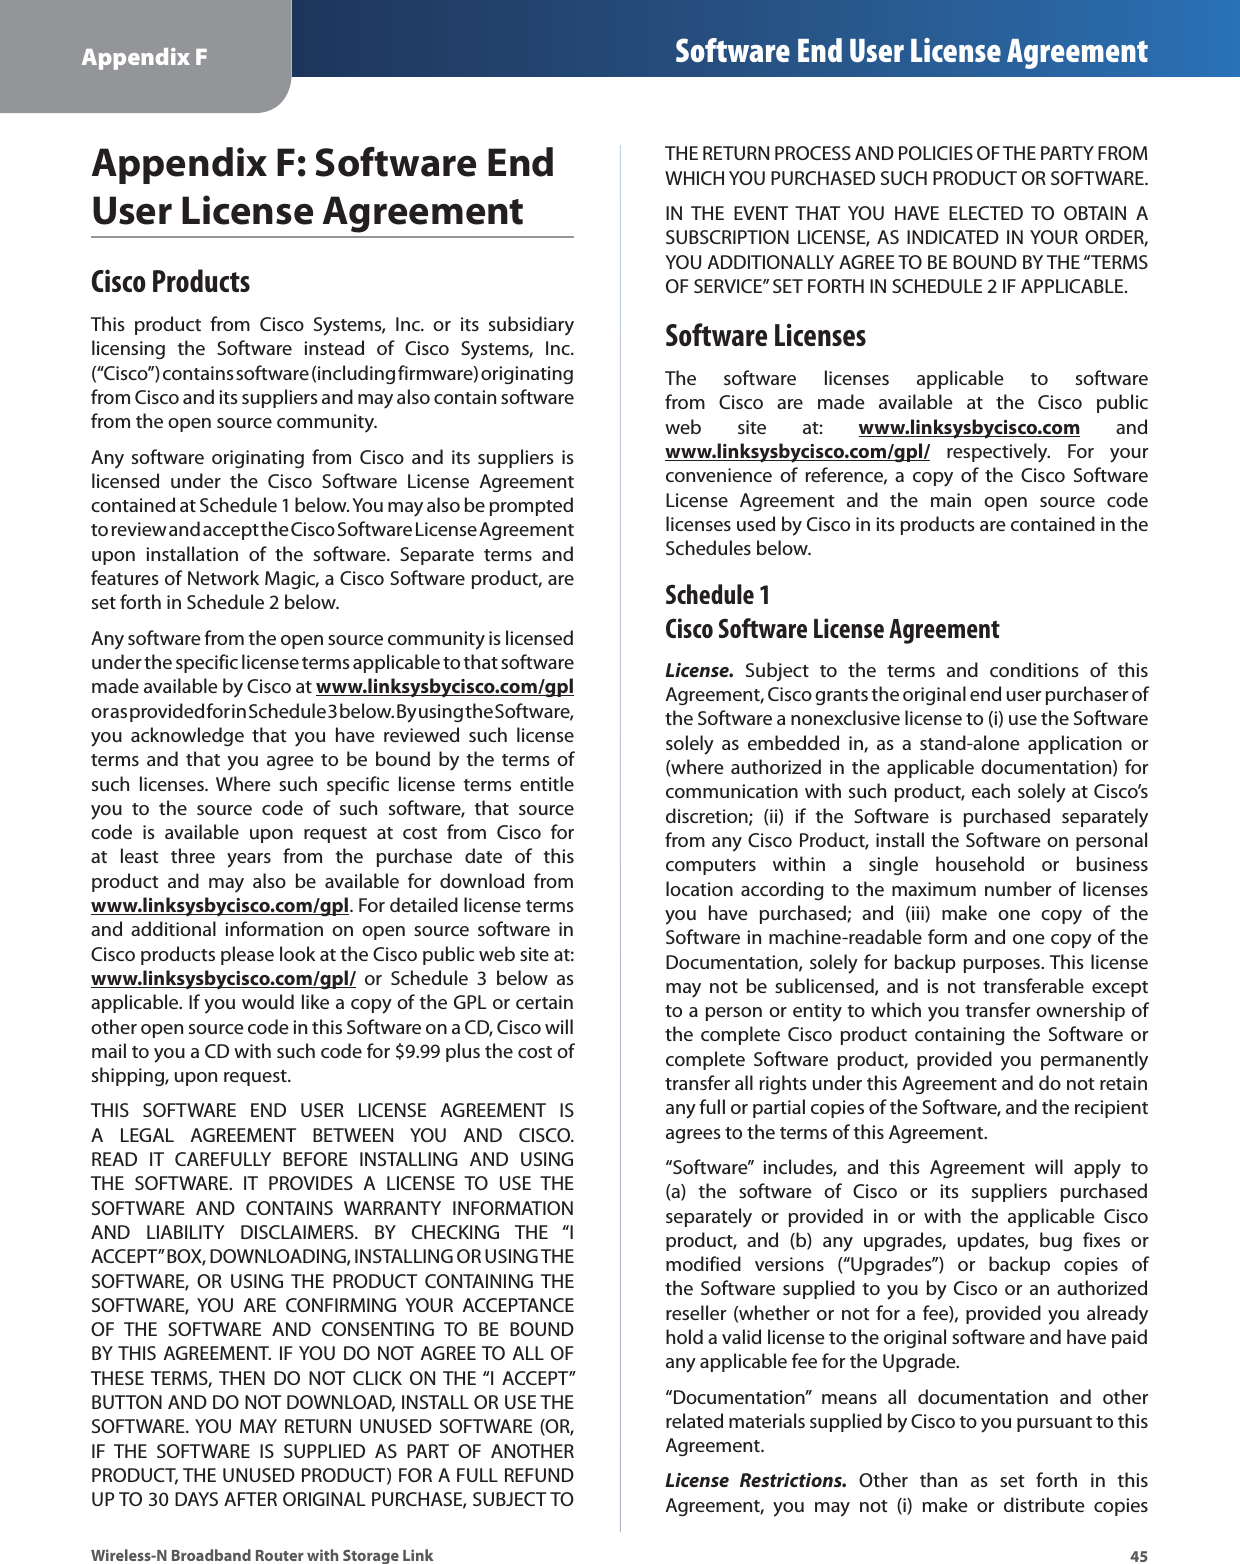 45Appendix F Software End User License AgreementWireless-N Broadband Router with Storage LinkAppendix F: Software End User License AgreementCisco ProductsThis product from Cisco Systems, Inc. or its subsidiary licensing the Software instead of Cisco Systems, Inc. (“Cisco”) contains software (including firmware) originating from Cisco and its suppliers and may also contain software from the open source community.Any software originating from Cisco and its suppliers is licensed under the Cisco Software License Agreement contained at Schedule 1 below. You may also be prompted to review and accept the Cisco Software License Agreement upon installation of the software. Separate terms and features of Network Magic, a Cisco Software product, are set forth in Schedule 2 below. Any software from the open source community is licensed under the specific license terms applicable to that software made available by Cisco at www.linksysbycisco.com/gpl or as provided for in Schedule 3 below. By using the Software, you acknowledge that you have reviewed such license terms and that you agree to be bound by the terms of such licenses. Where such specific license terms entitle you to the source code of such software, that source code is available upon request at cost from Cisco for at least three years from the purchase date of this product and may also be available for download from www.linksysbycisco.com/gpl. For detailed license terms and additional information on open source software in Cisco products please look at the Cisco public web site at: www.linksysbycisco.com/gpl/ or Schedule 3 below as applicable. If you would like a copy of the GPL or certain other open source code in this Software on a CD, Cisco will mail to you a CD with such code for $9.99 plus the cost of shipping, upon request.THIS SOFTWARE END USER LICENSE AGREEMENT IS A LEGAL AGREEMENT BETWEEN YOU AND CISCO. READ IT CAREFULLY BEFORE INSTALLING AND USING THE SOFTWARE. IT PROVIDES A LICENSE TO USE THE SOFTWARE AND CONTAINS WARRANTY INFORMATION AND LIABILITY DISCLAIMERS. BY CHECKING THE “I ACCEPT” BOX, DOWNLOADING, INSTALLING OR USING THE SOFTWARE, OR USING THE PRODUCT CONTAINING THE SOFTWARE, YOU ARE CONFIRMING YOUR ACCEPTANCE OF THE SOFTWARE AND CONSENTING TO BE BOUND BY THIS AGREEMENT. IF YOU DO NOT AGREE TO ALL OF THESE TERMS, THEN DO NOT CLICK ON THE “I ACCEPT” BUTTON AND DO NOT DOWNLOAD, INSTALL OR USE THE SOFTWARE. YOU MAY RETURN UNUSED SOFTWARE (OR, IF THE SOFTWARE IS SUPPLIED AS PART OF ANOTHER PRODUCT, THE UNUSED PRODUCT) FOR A FULL REFUND UP TO 30 DAYS AFTER ORIGINAL PURCHASE, SUBJECT TO THE RETURN PROCESS AND POLICIES OF THE PARTY FROM WHICH YOU PURCHASED SUCH PRODUCT OR SOFTWARE.IN THE EVENT THAT YOU HAVE ELECTED TO OBTAIN A SUBSCRIPTION LICENSE, AS INDICATED IN YOUR ORDER, YOU ADDITIONALLY AGREE TO BE BOUND BY THE “TERMS OF SERVICE” SET FORTH IN SCHEDULE 2 IF APPLICABLE.Software LicensesThe software licenses applicable to software from Cisco are made available at the Cisco public web site at: www.linksysbycisco.com and www.linksysbycisco.com/gpl/ respectively. For your convenience of reference, a copy of the Cisco Software License Agreement and the main open source code licenses used by Cisco in its products are contained in the Schedules below.Schedule 1 Cisco Software License AgreementLicense. Subject to the terms and conditions of this Agreement, Cisco grants the original end user purchaser of the Software a nonexclusive license to (i) use the Software solely as embedded in, as a stand-alone application or (where authorized in the applicable documentation) for communication with such product, each solely at Cisco’s discretion; (ii) if the Software is purchased separately from any Cisco Product, install the Software on personal computers within a single household or business location according to the maximum number of licenses you have purchased; and (iii) make one copy of the Software in machine-readable form and one copy of the Documentation, solely for backup purposes. This license may not be sublicensed, and is not transferable except to a person or entity to which you transfer ownership of the complete Cisco product containing the Software or complete Software product, provided you permanently transfer all rights under this Agreement and do not retain any full or partial copies of the Software, and the recipient agrees to the terms of this Agreement. “Software” includes, and this Agreement will apply to (a) the software of Cisco or its suppliers purchased separately or provided in or with the applicable Cisco product, and (b) any upgrades, updates, bug fixes or modified versions (“Upgrades”) or backup copies of the Software supplied to you by Cisco or an authorized reseller (whether or not for a fee), provided you already hold a valid license to the original software and have paid any applicable fee for the Upgrade. “Documentation” means all documentation and other related materials supplied by Cisco to you pursuant to this Agreement.License Restrictions. Other than as set forth in this Agreement, you may not (i) make or distribute copies 